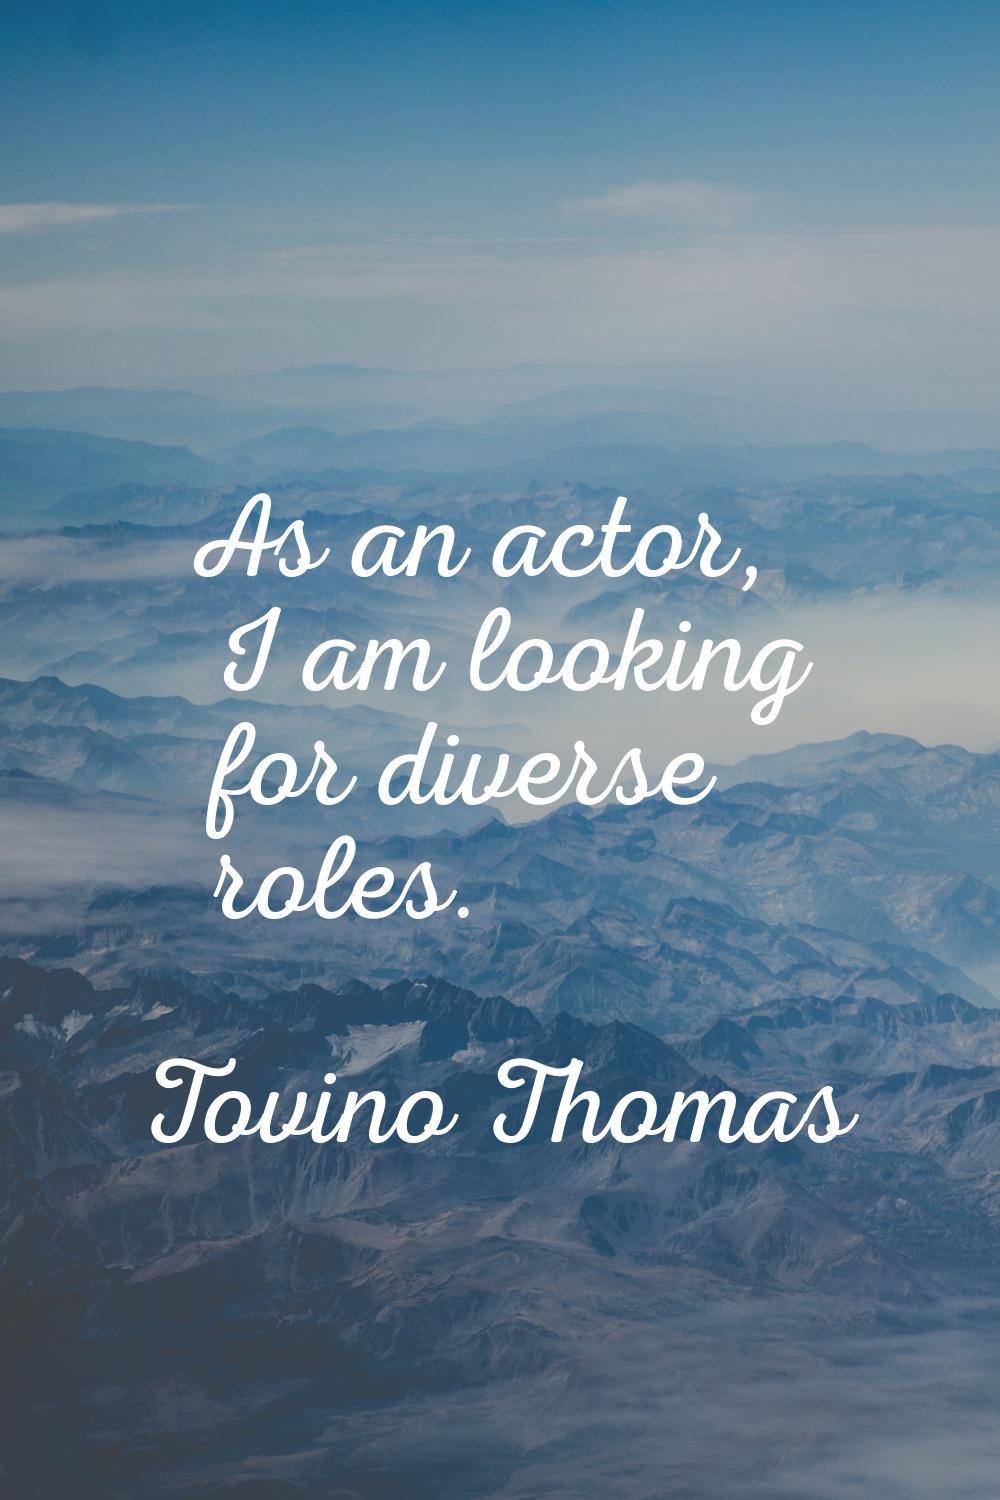 As an actor, I am looking for diverse roles.